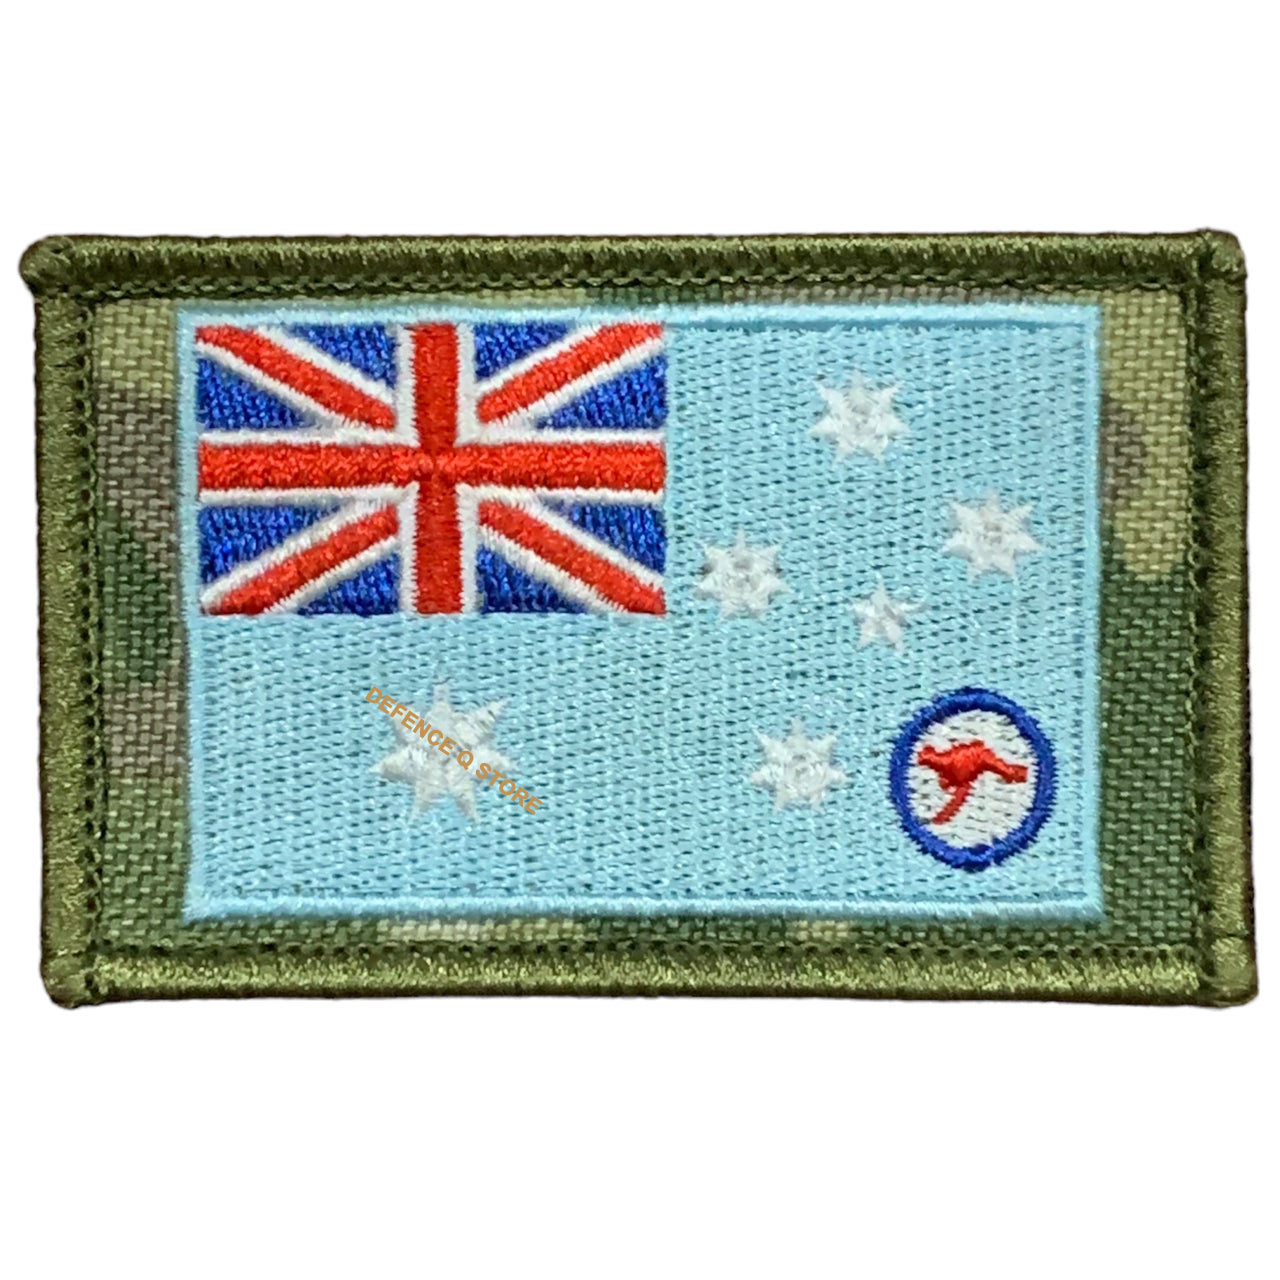 The Royal Air Force Ensign  In 1948, it was decided to have an Ensign that would better reflect an Australian identity, so the Southern Cross and the Commonwealth Star were added and the Roundel reduced in size. This design was granted Royal approval in October 1948. www.defenceqstore.com.au